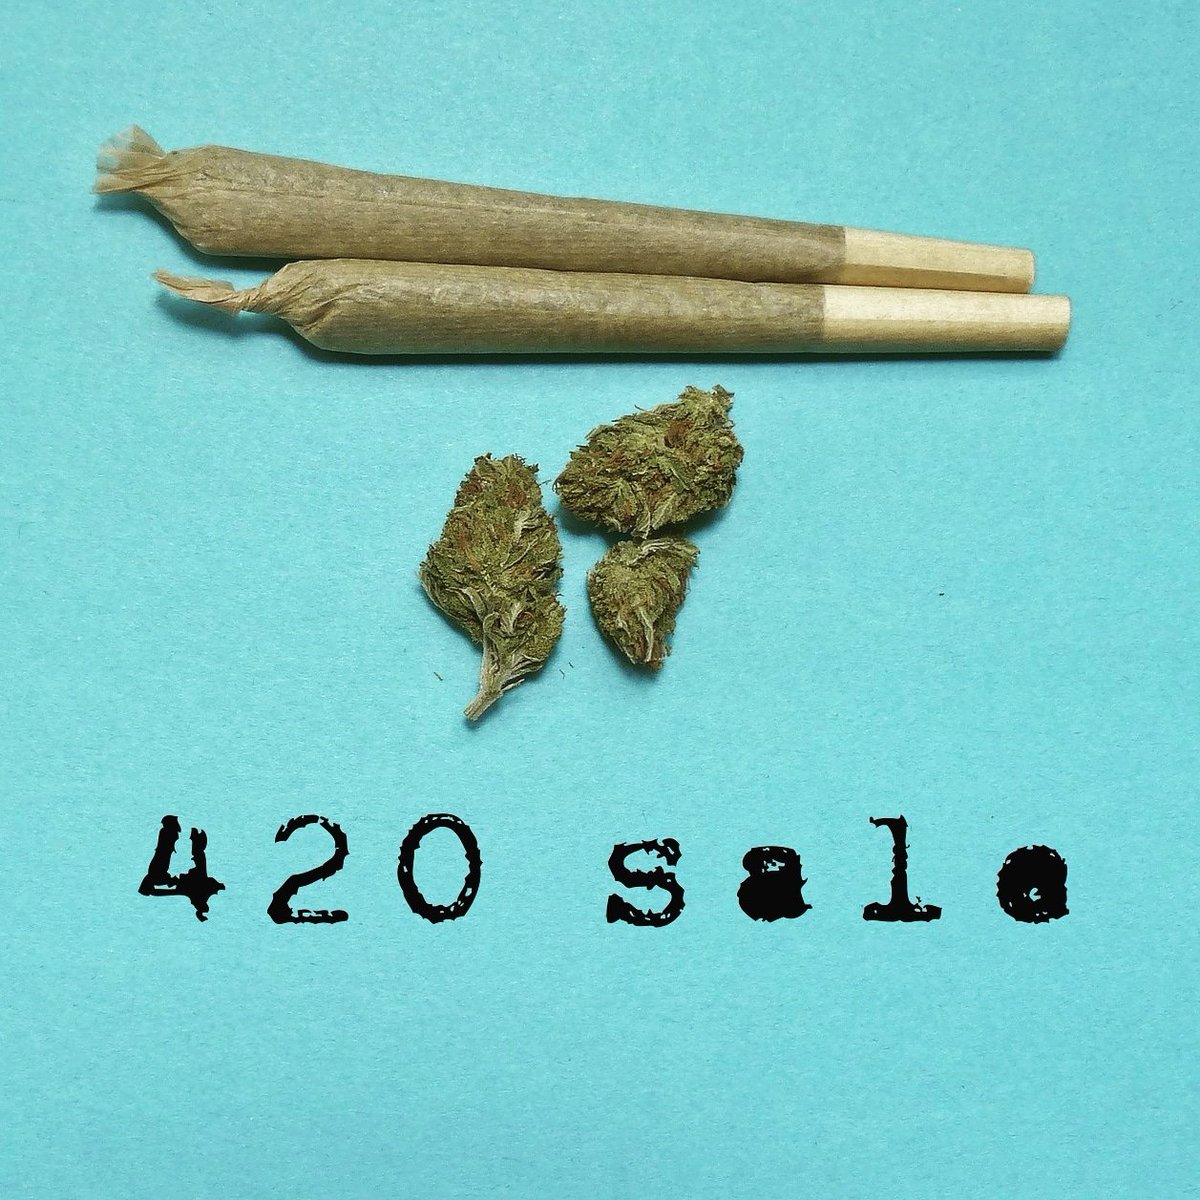 Today all of us stoners will get together and celebrate this plant and what it really is. I want to celebrate with a sale. 20% off on select stoner items. Visit my Etsy for the dank deals.
#messyjessyproducts #420sale #seattlestoners #cannabis #420day 

etsy.com/shop/messyjess…